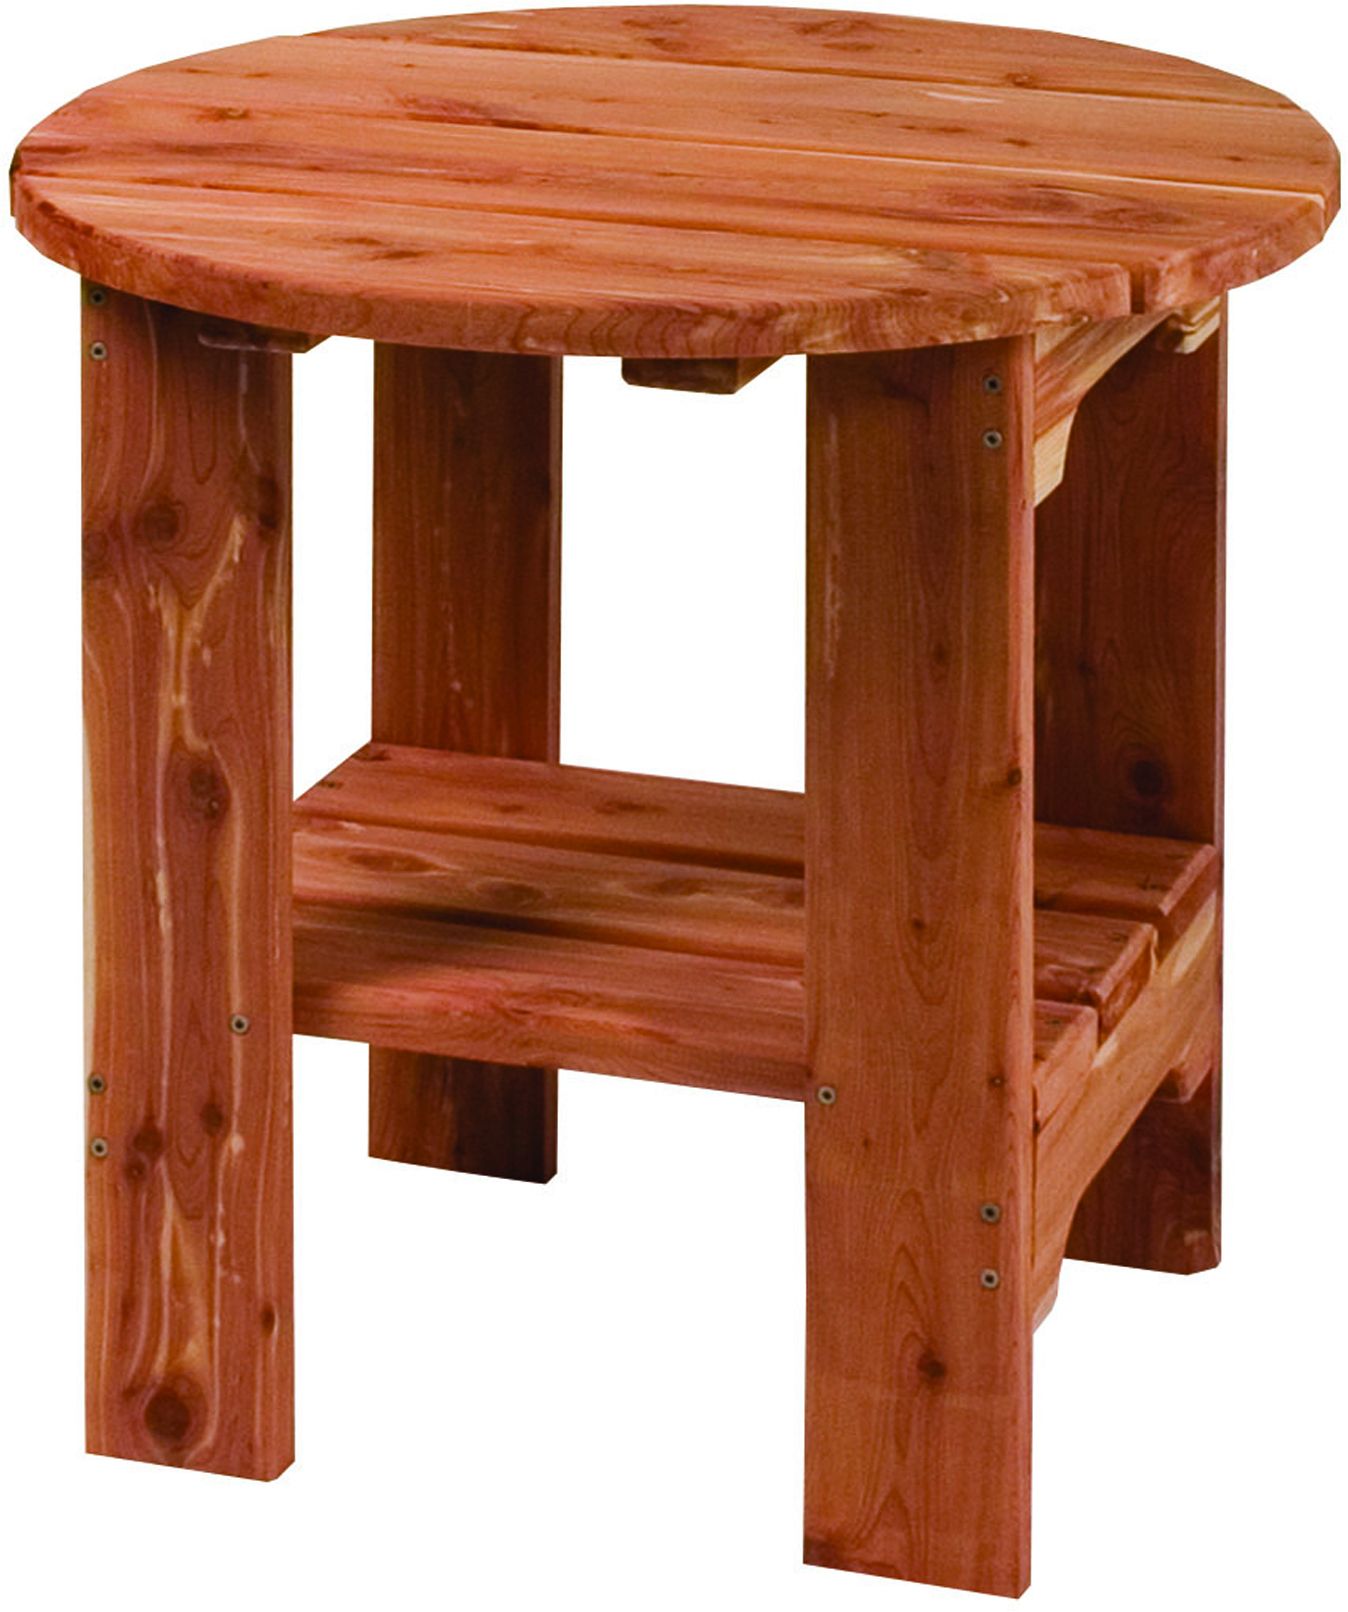 Round Cedar Side Table | Amish Outdoor Side Table | Patio Side Table Within Wood And Steel Outdoor Side Tables (View 6 of 15)